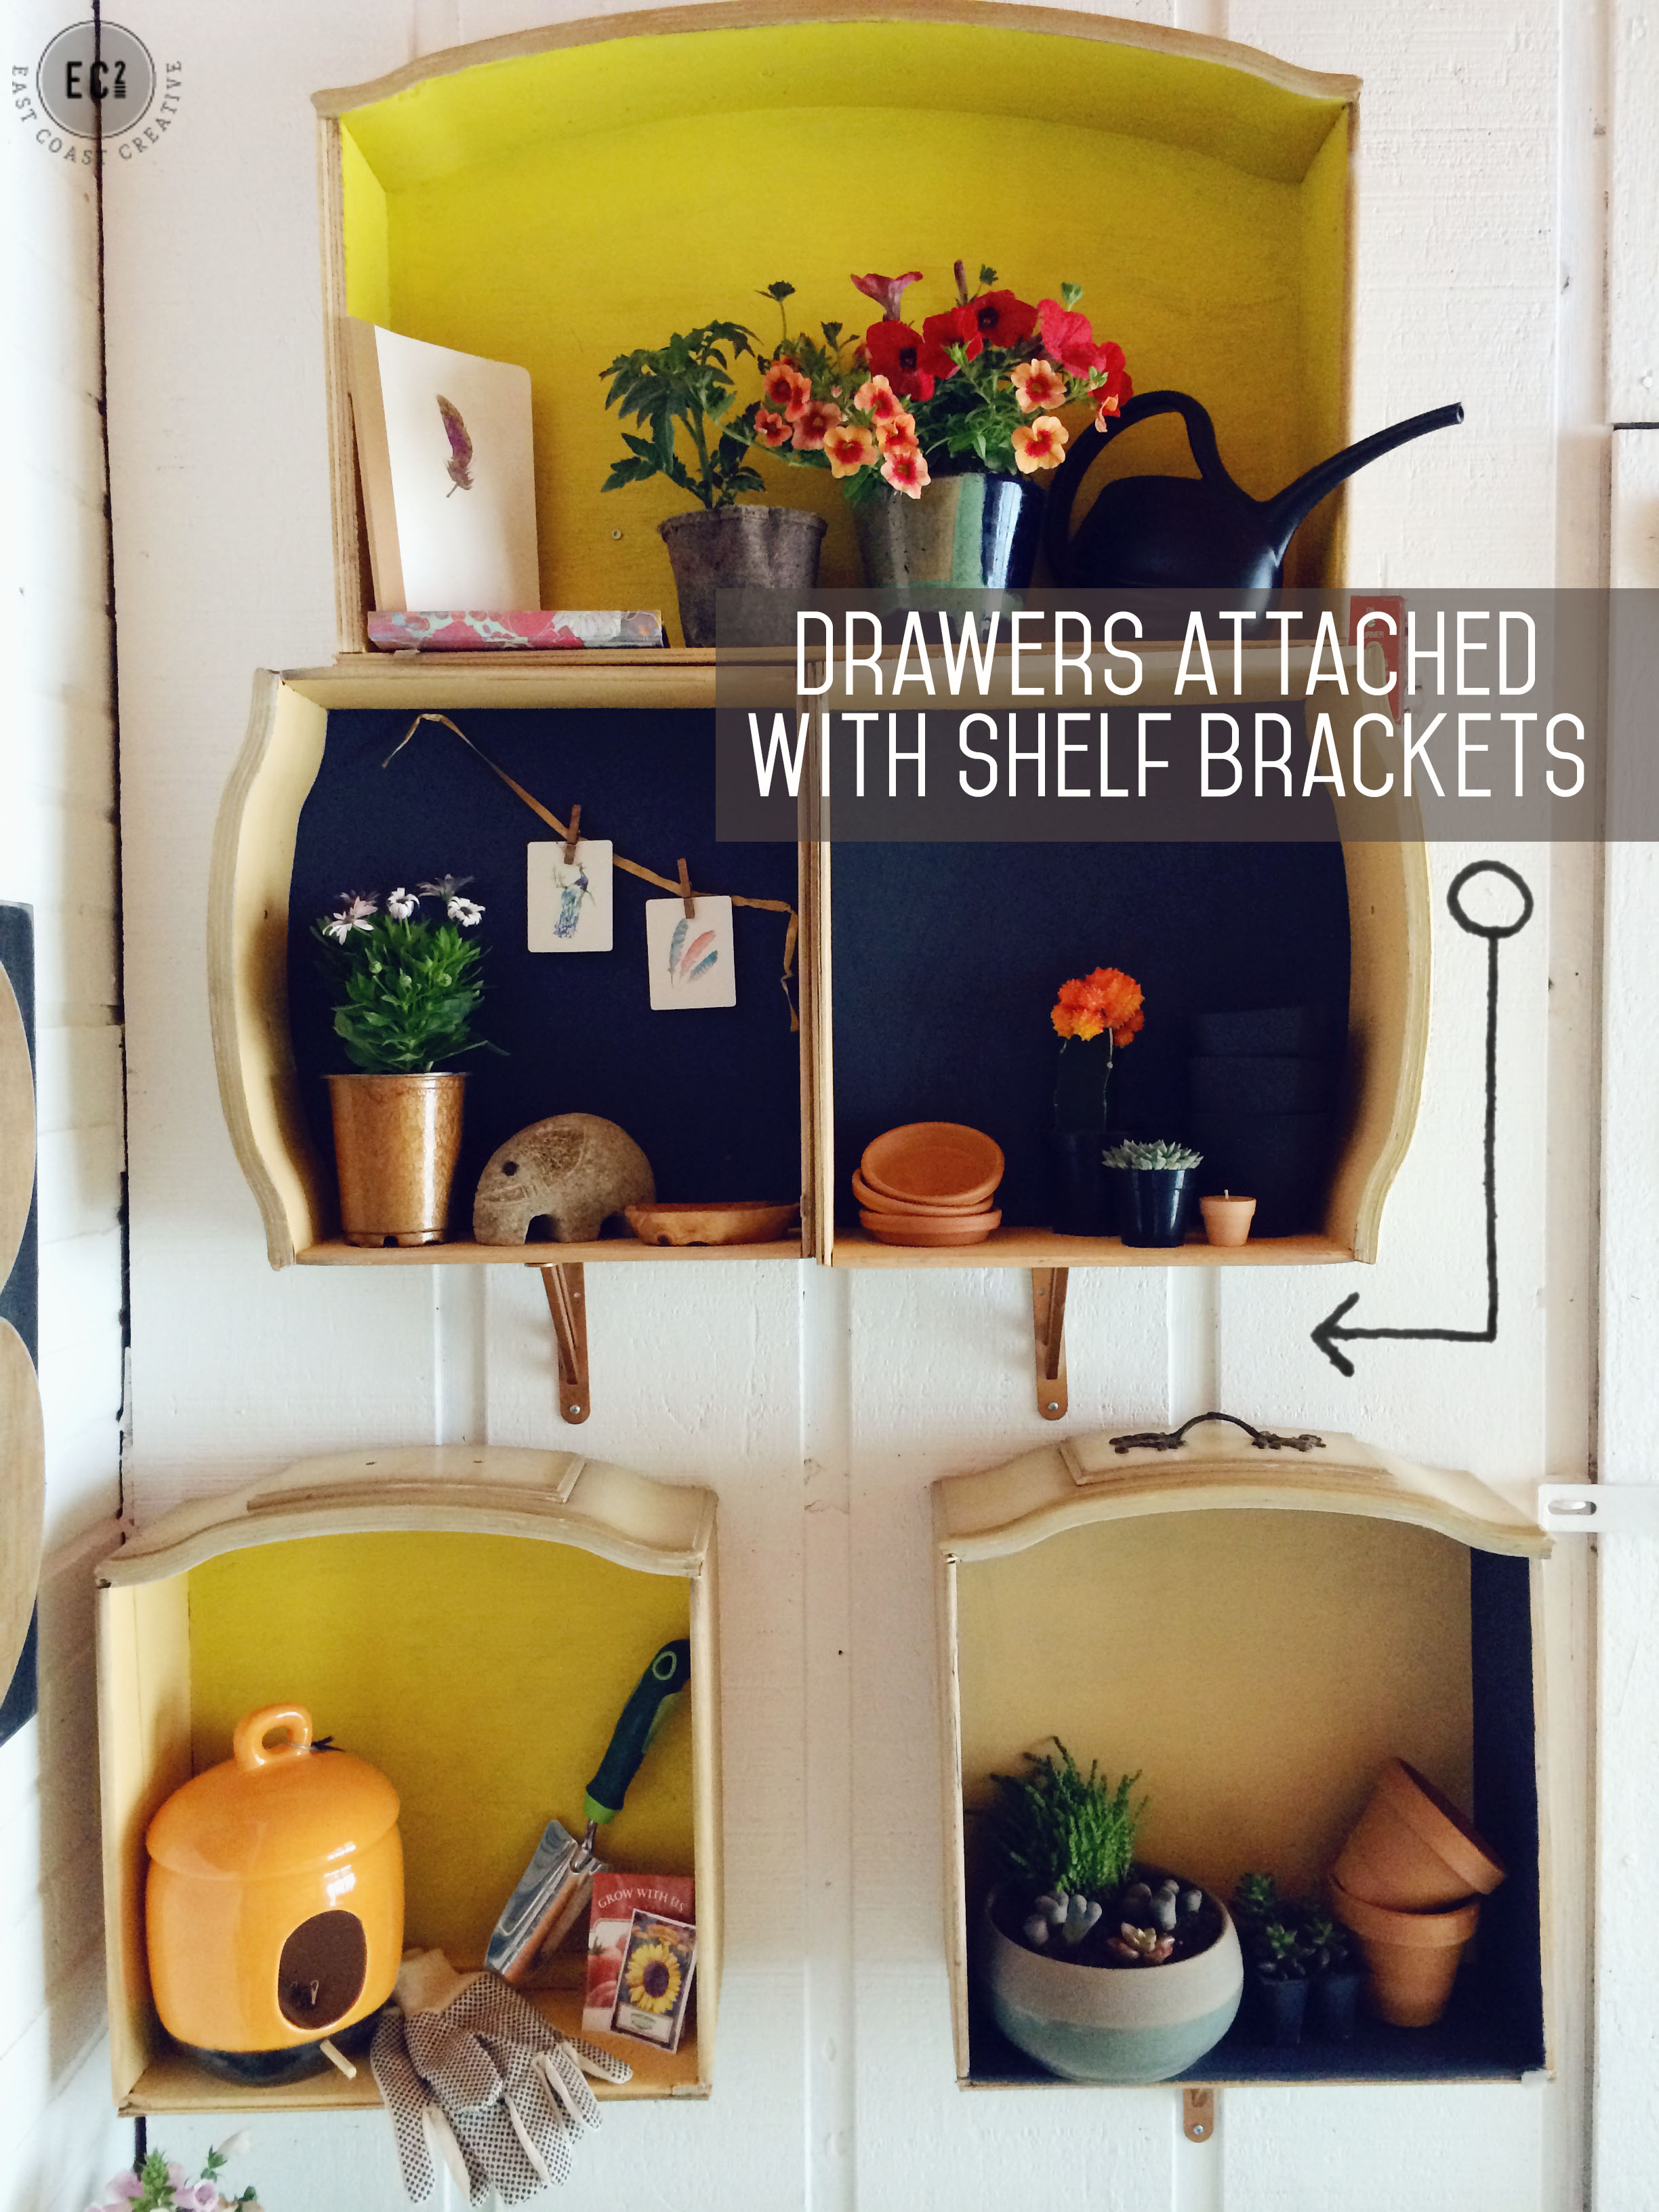 Wall Shelves Out Of Old Dresser Drawers, How To Turn Old Dresser Drawers Into Shelves